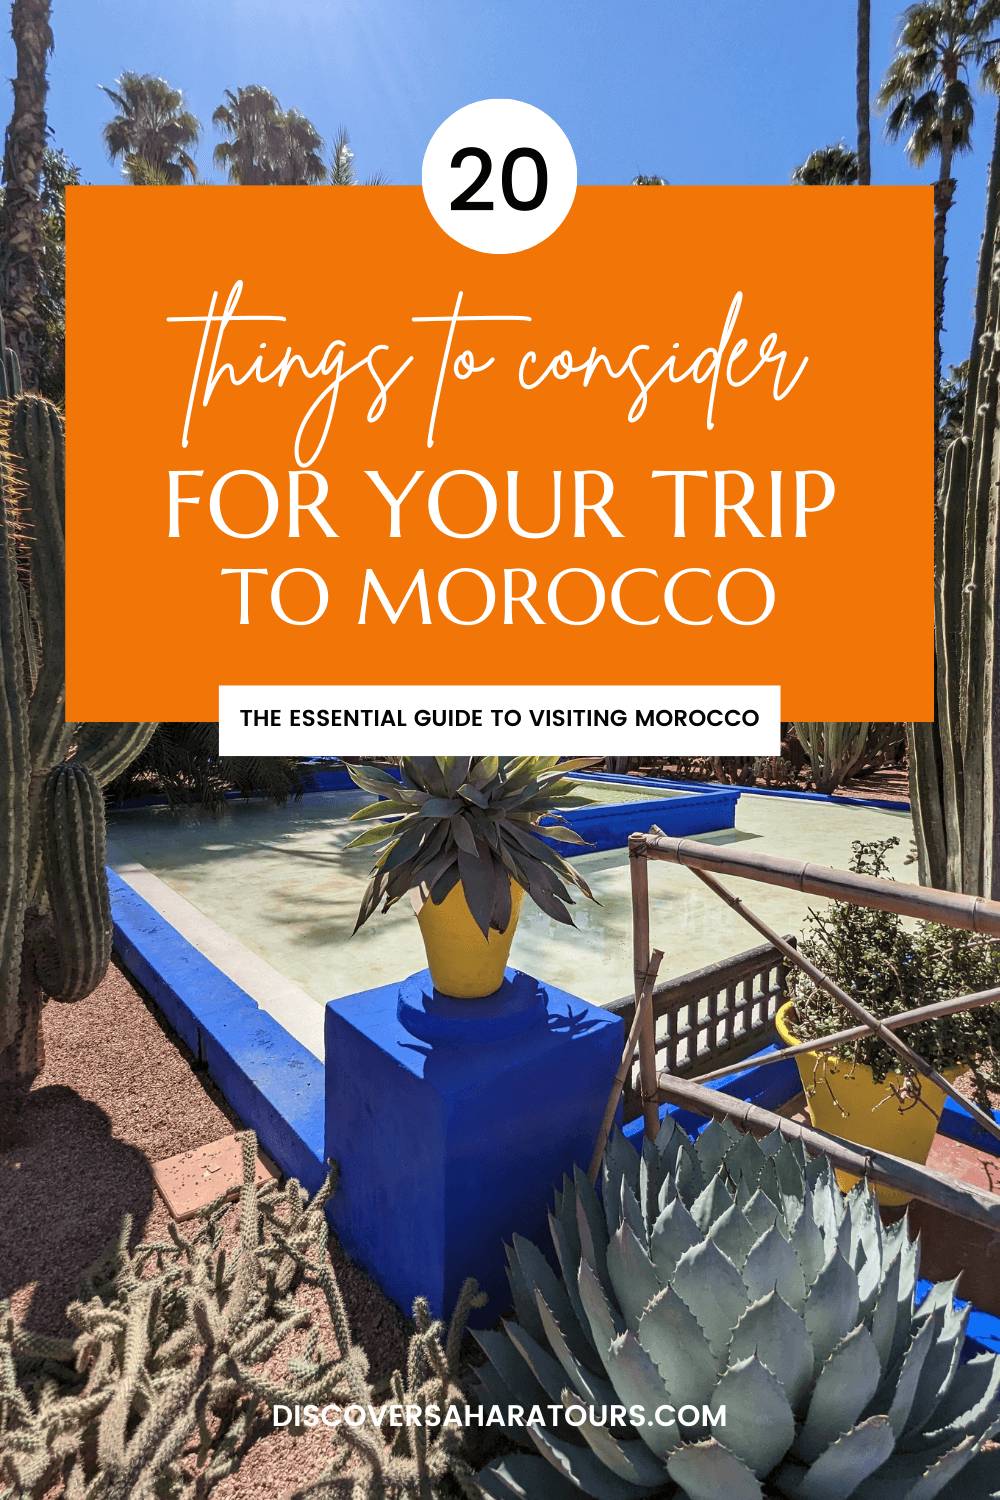 Pin for Pinterest: 20 Things to Consider for your Trip to Morocco